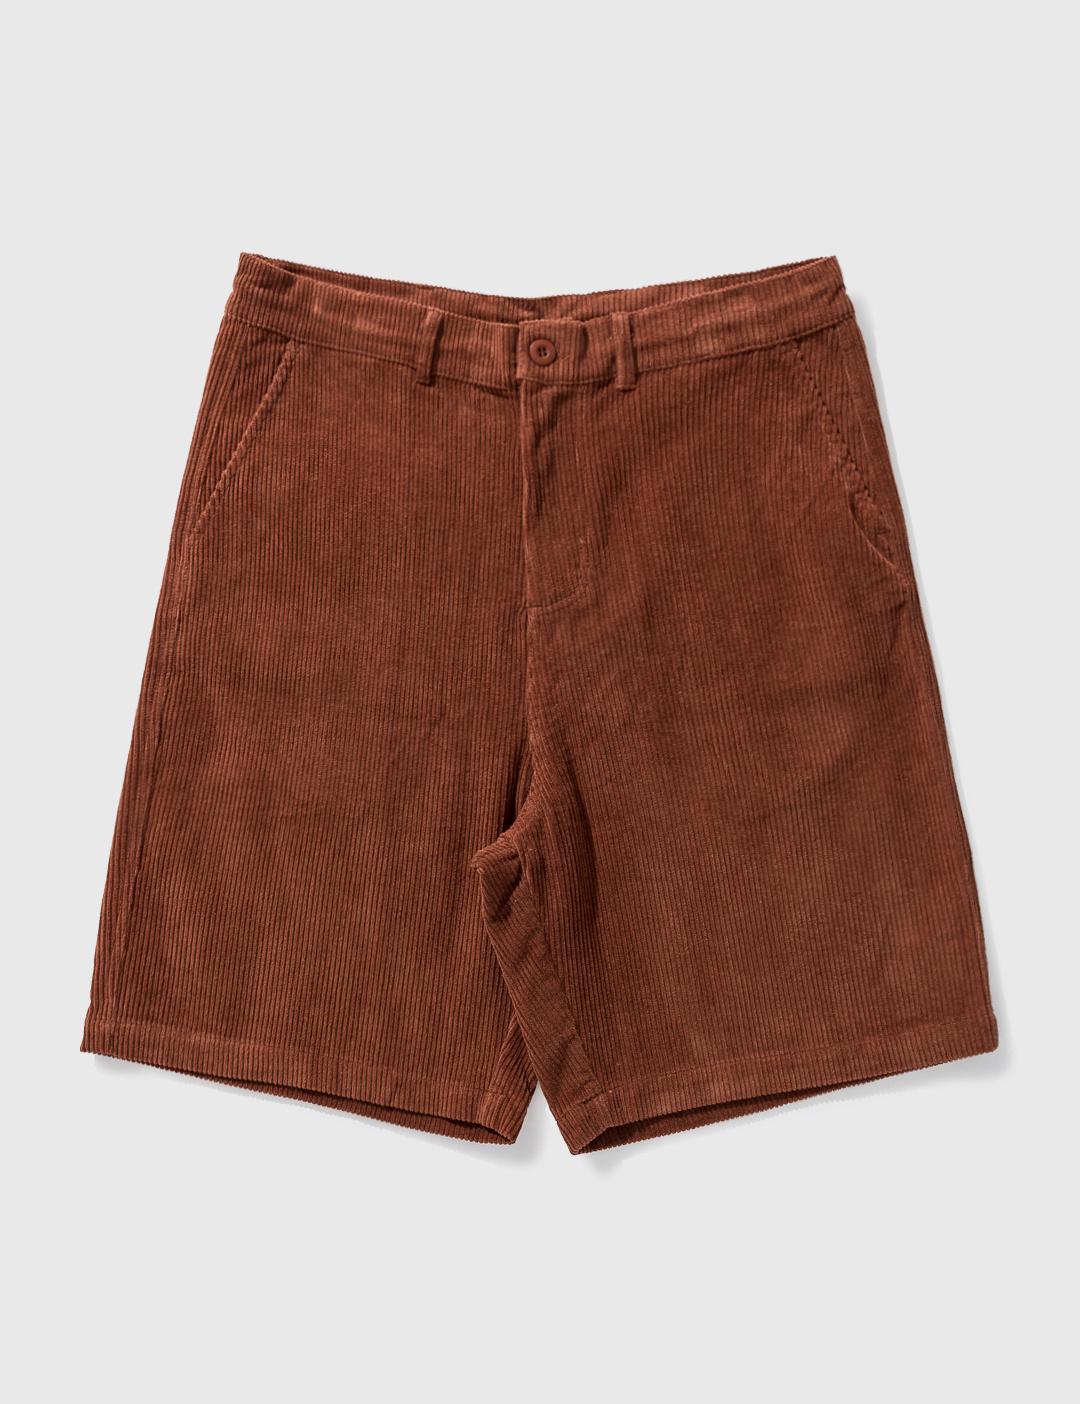 Chains Corduroy Shorts by BUTTER GOODS